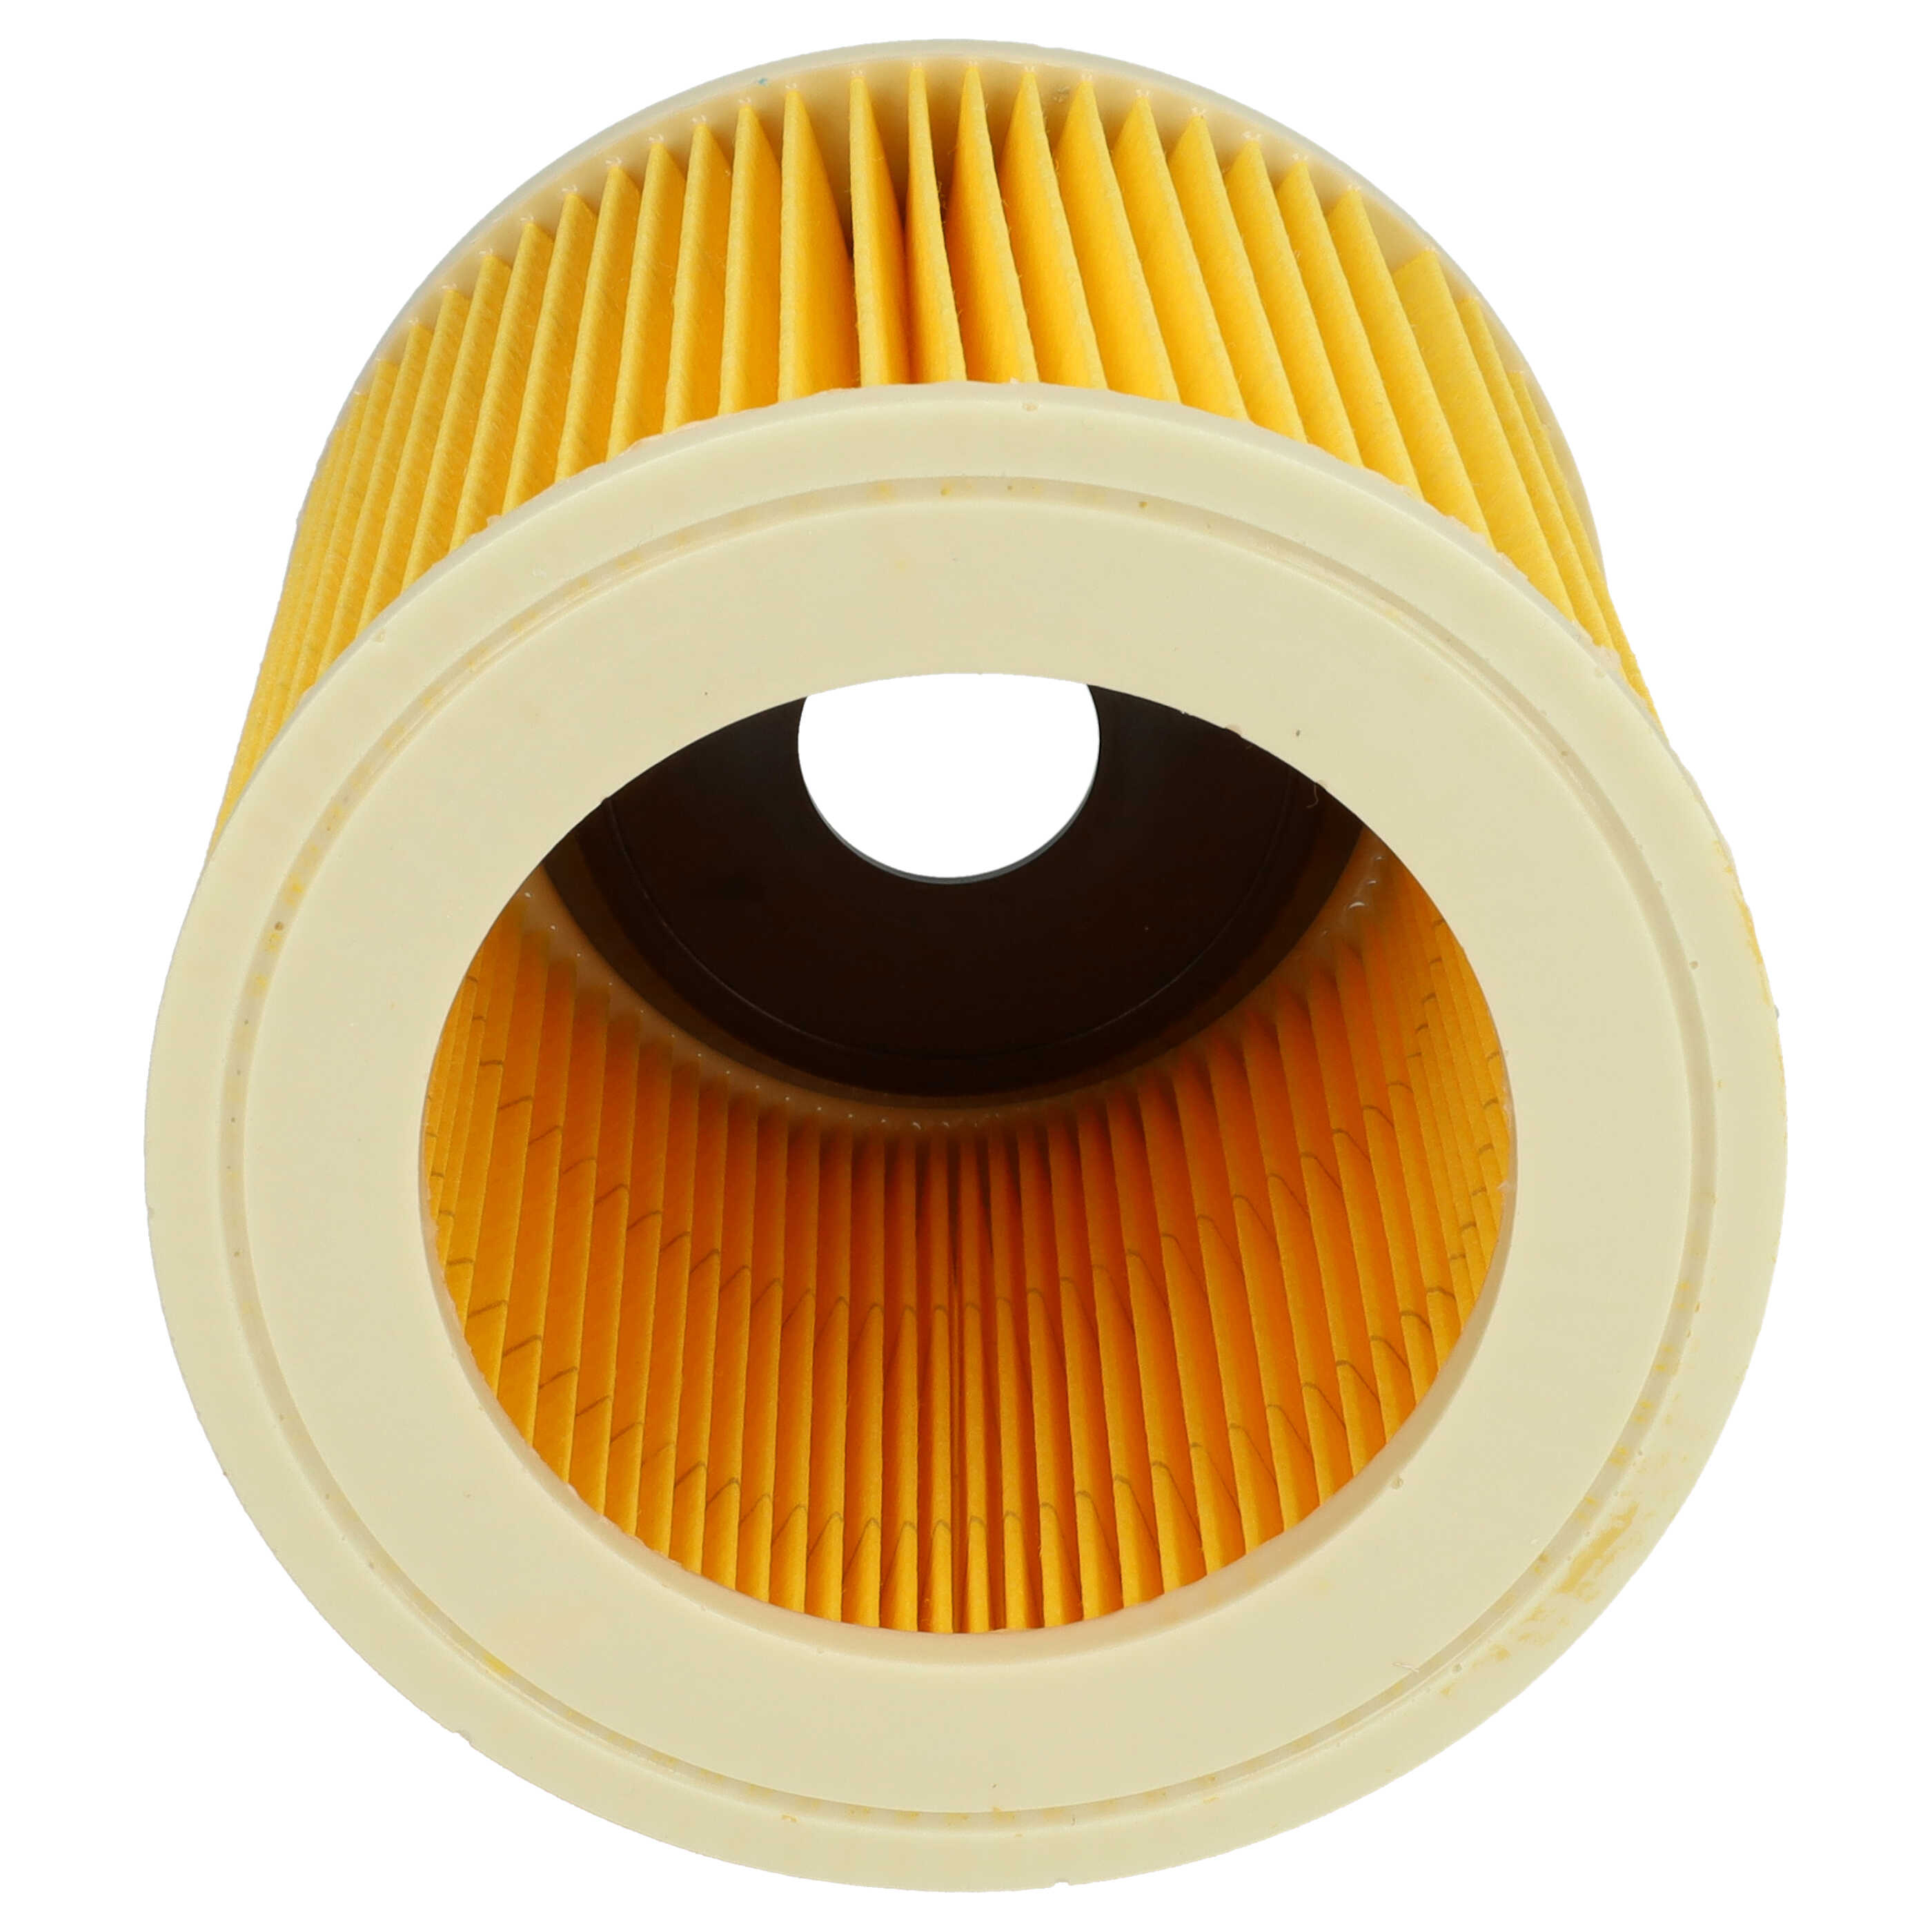 1x cartridge filter replaces Kärcher 2.863-303.0, 6.414-547.0 for PowerPlus Vacuum Cleaner, yellow